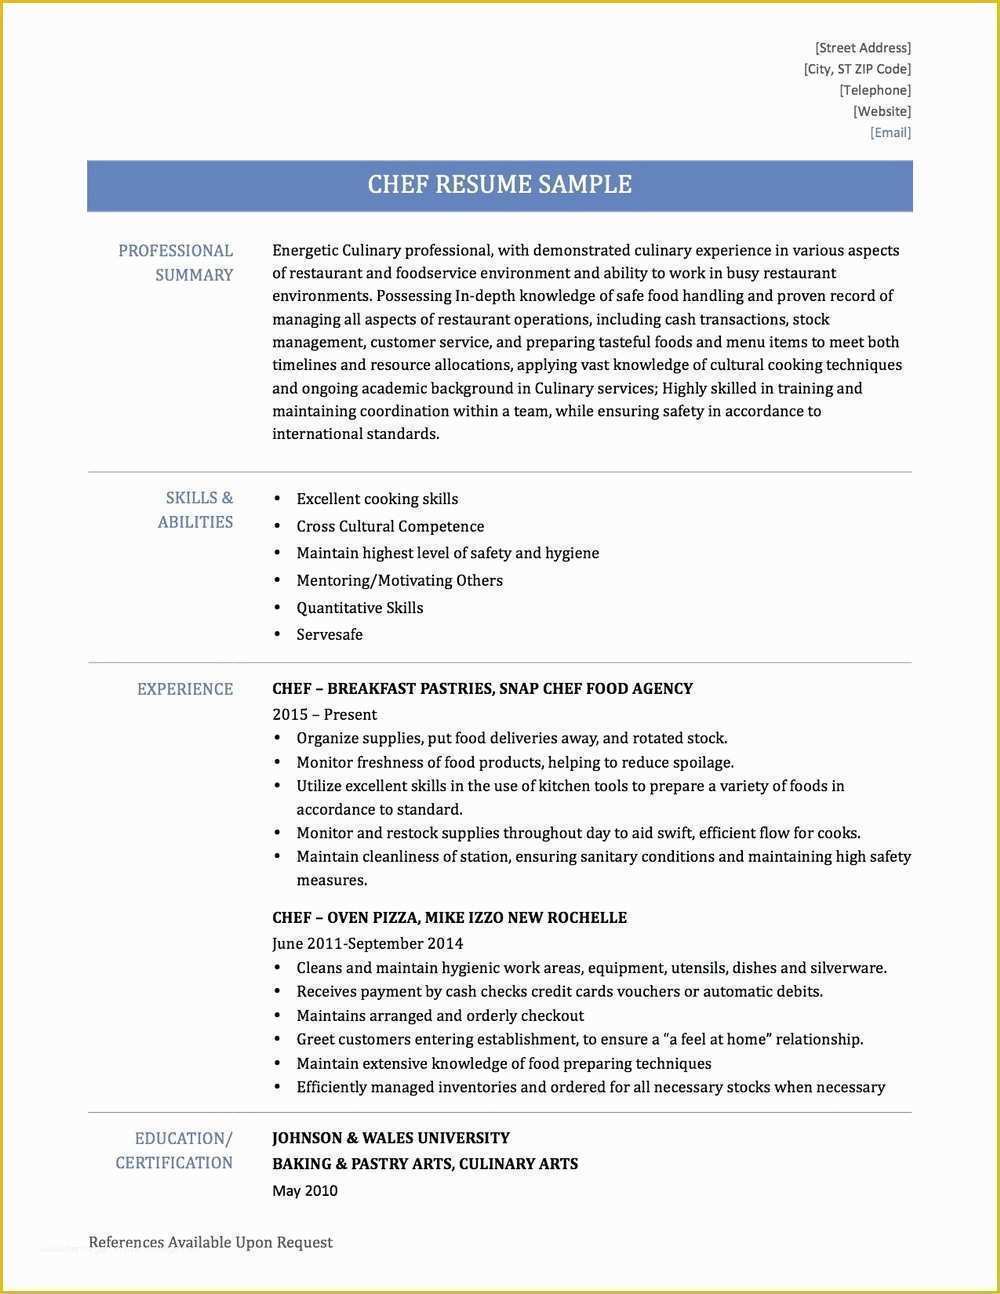 Chef Resume Template Free Of Chef Resume Template Free Resumes 2052